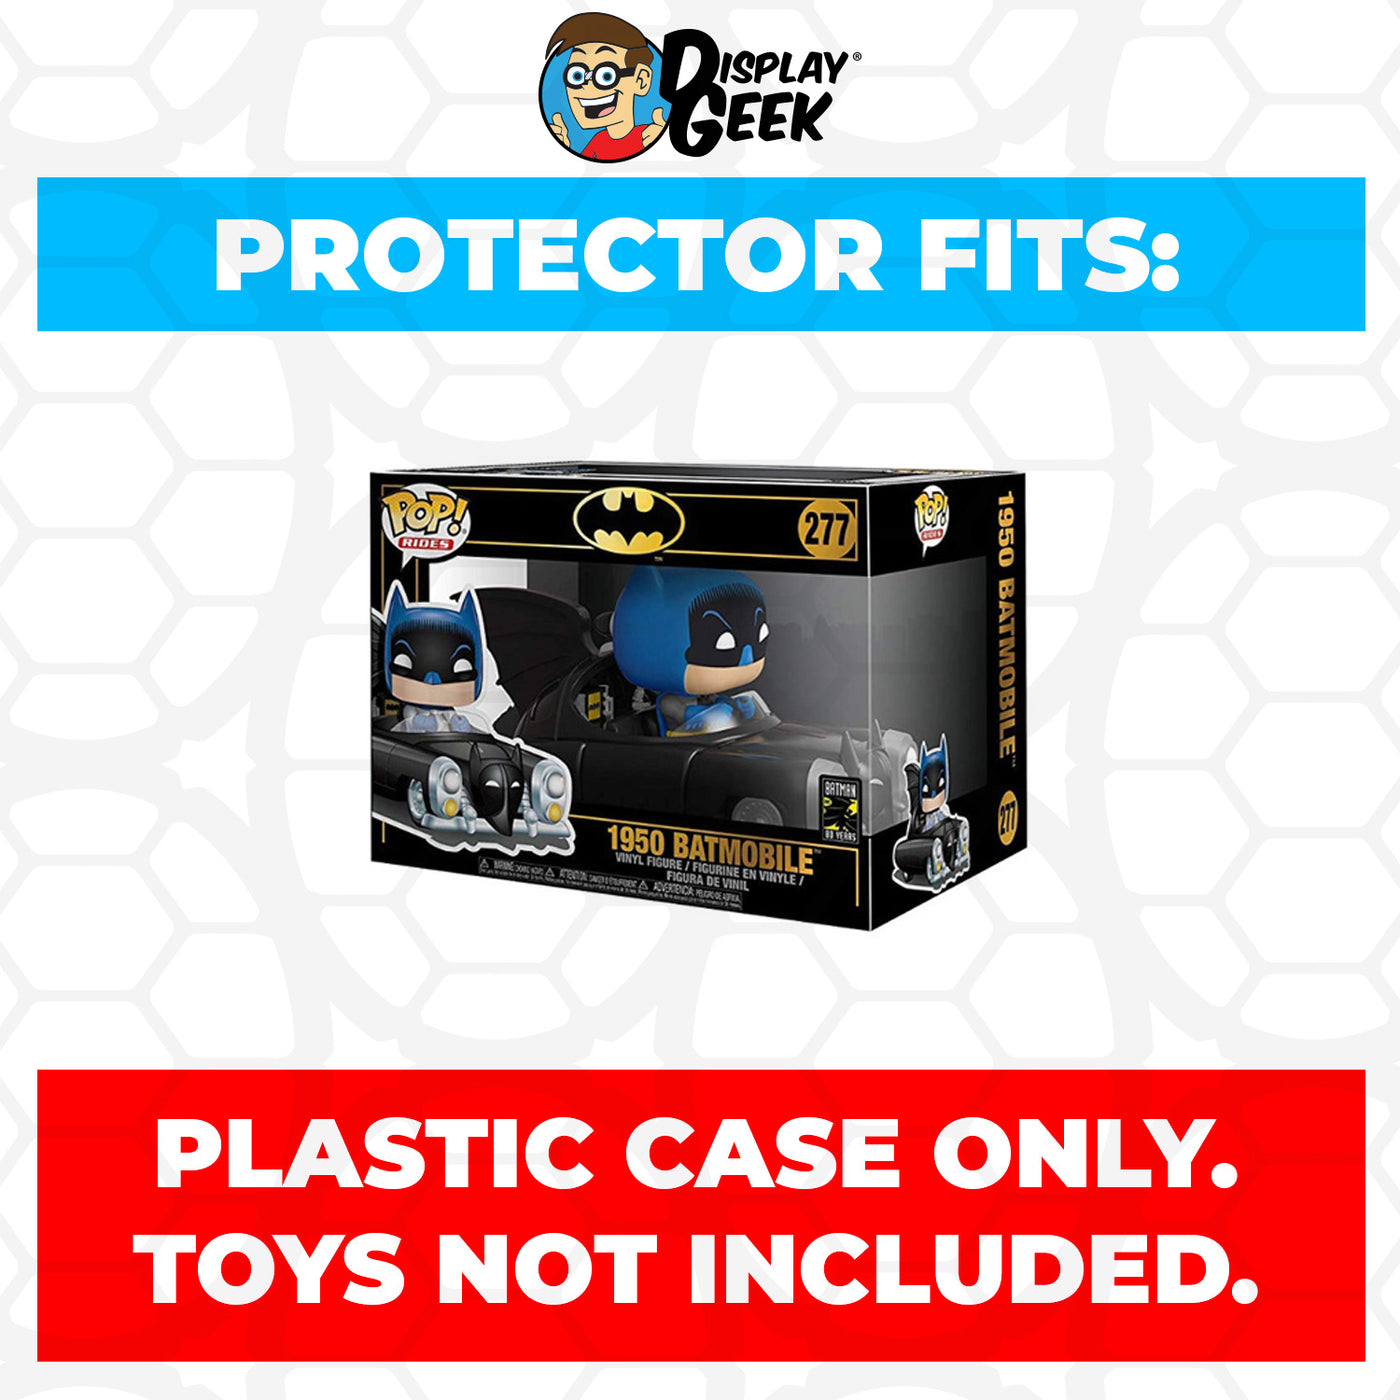 Pop Protector for Batmobile 1950 Black #277 Funko Pop Rides on The Protector Guide App by Display Geek